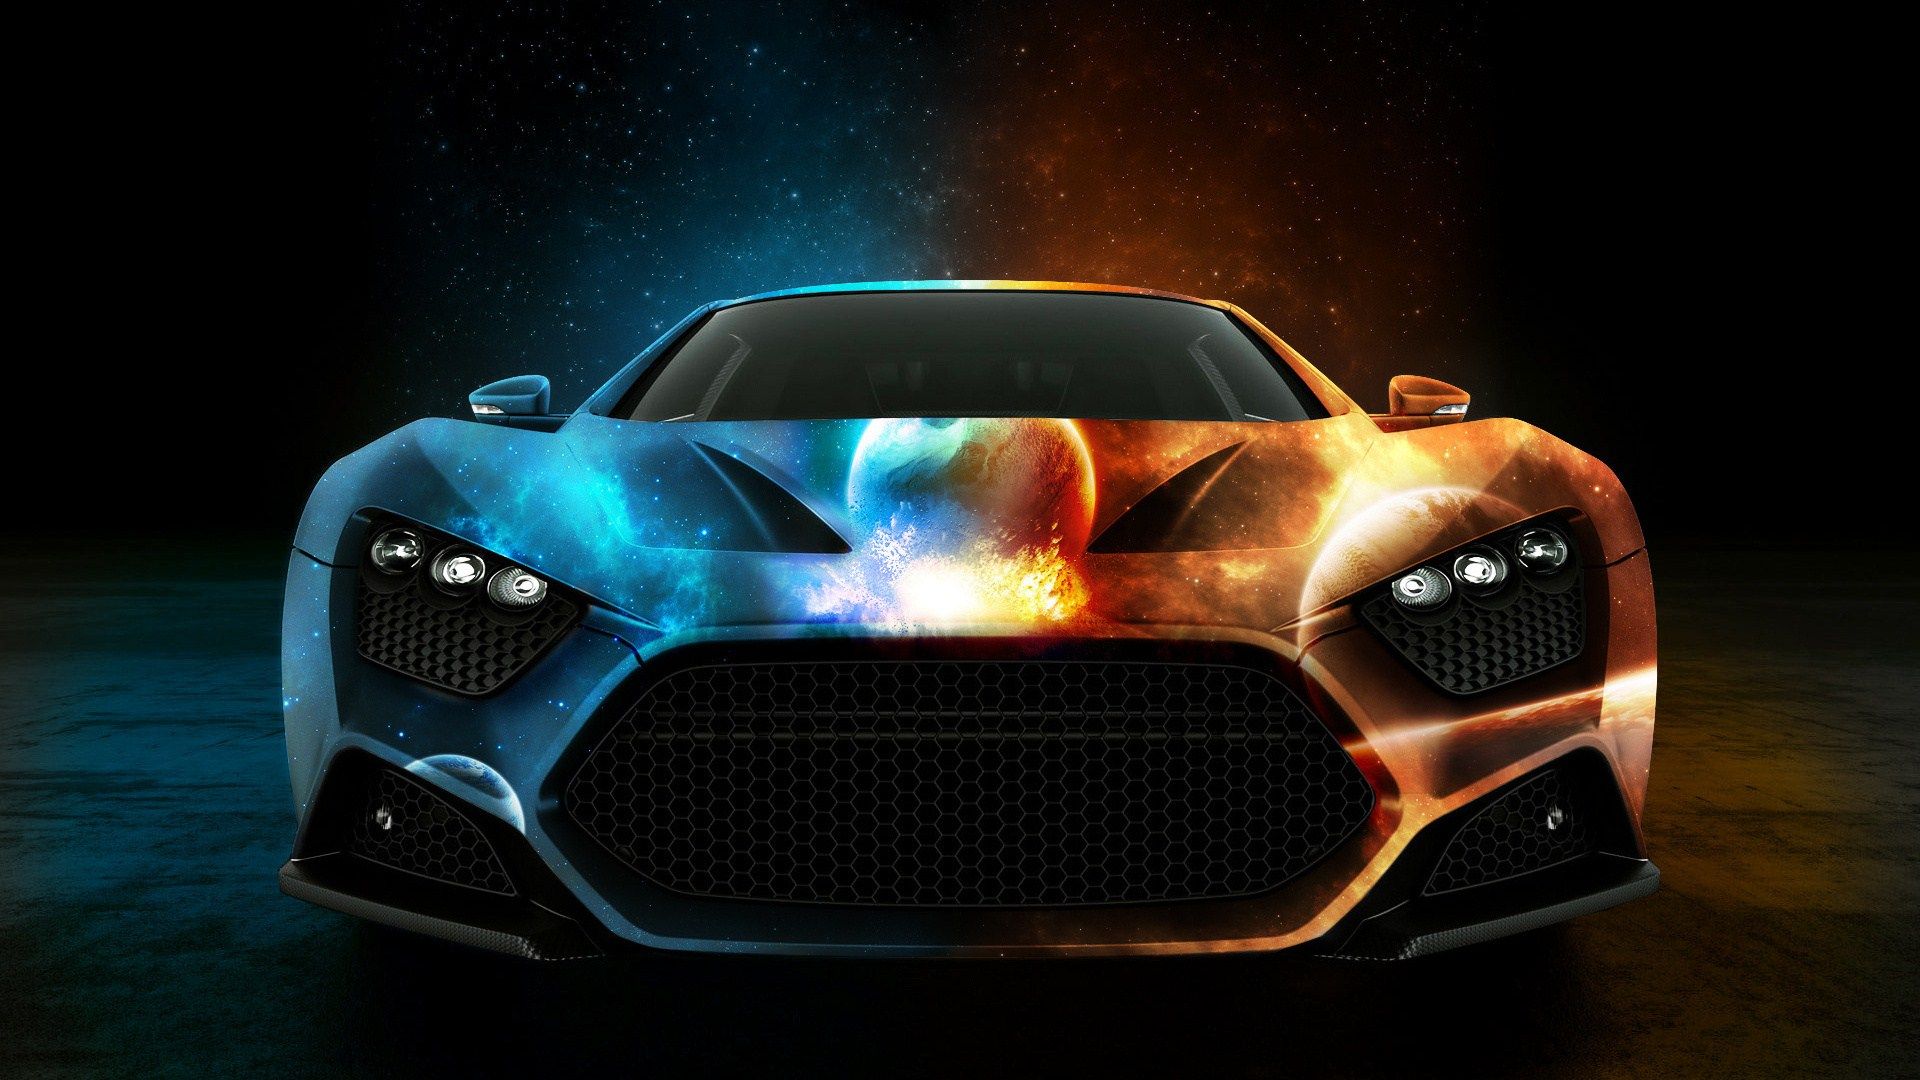 Abstract Car Wallpapers | HD Wallpapers | Pinterest | Car wallpapers ...